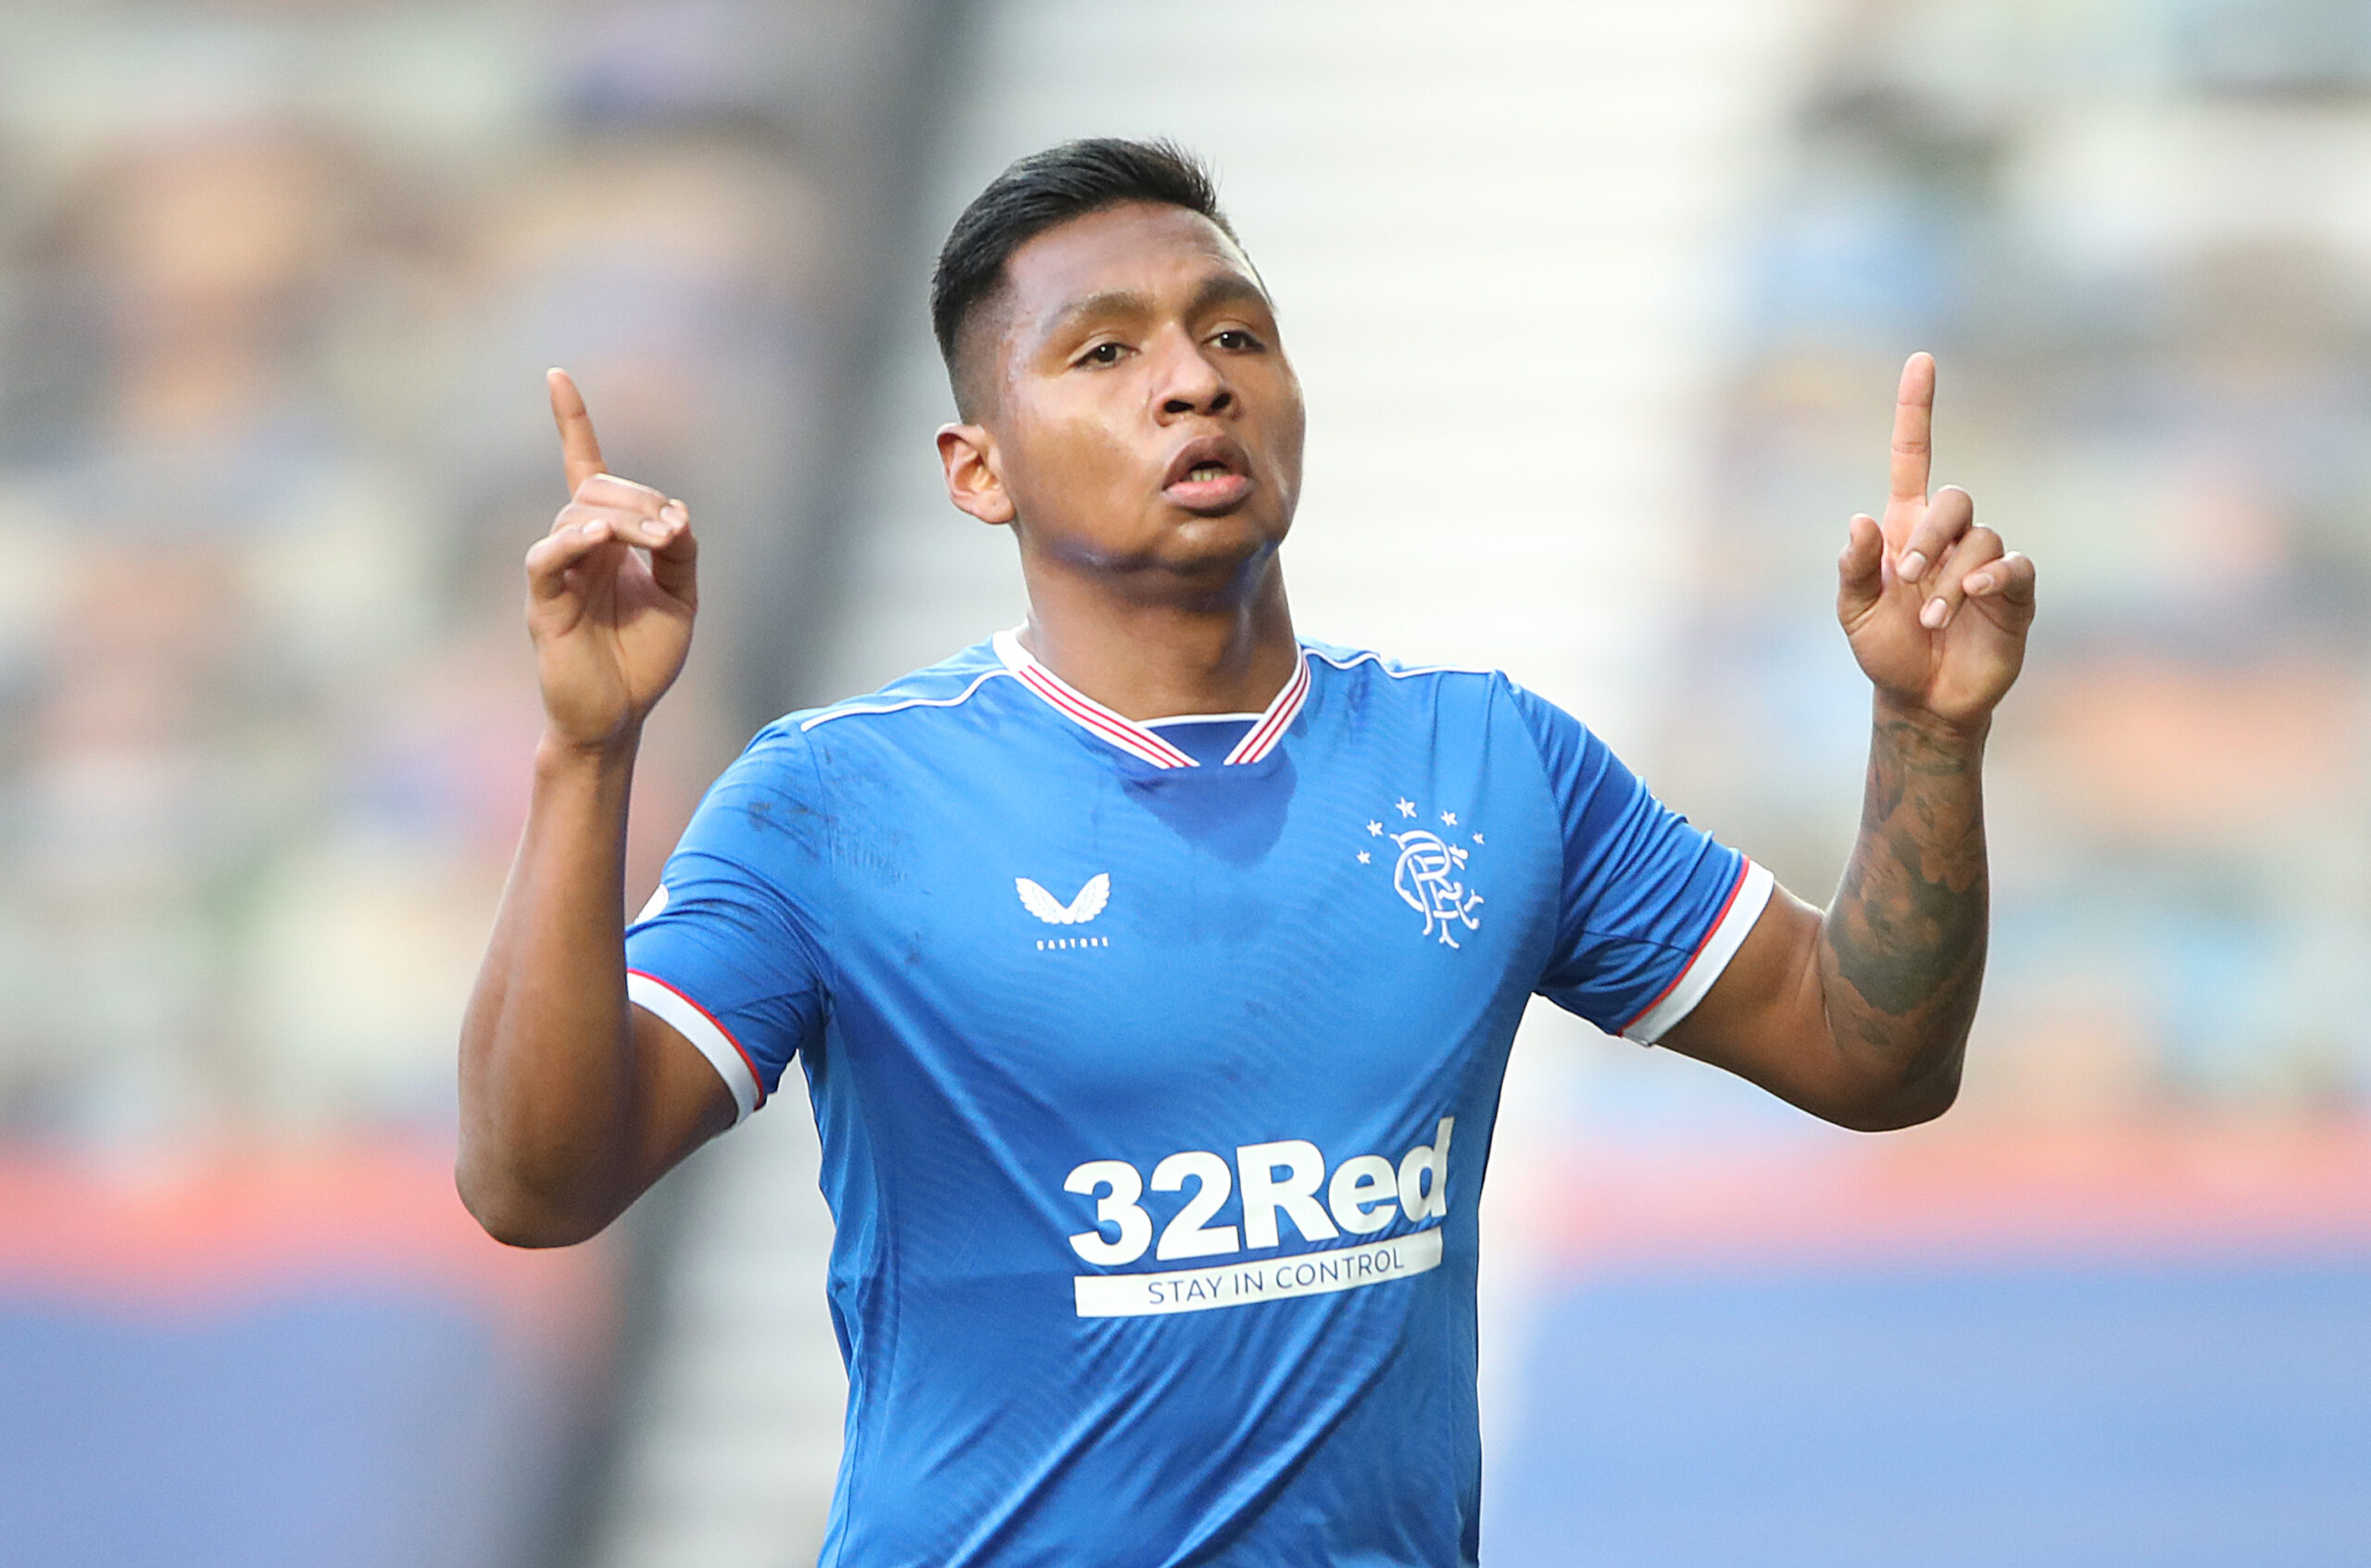 Morelos’ return could be all the difference for Rangers